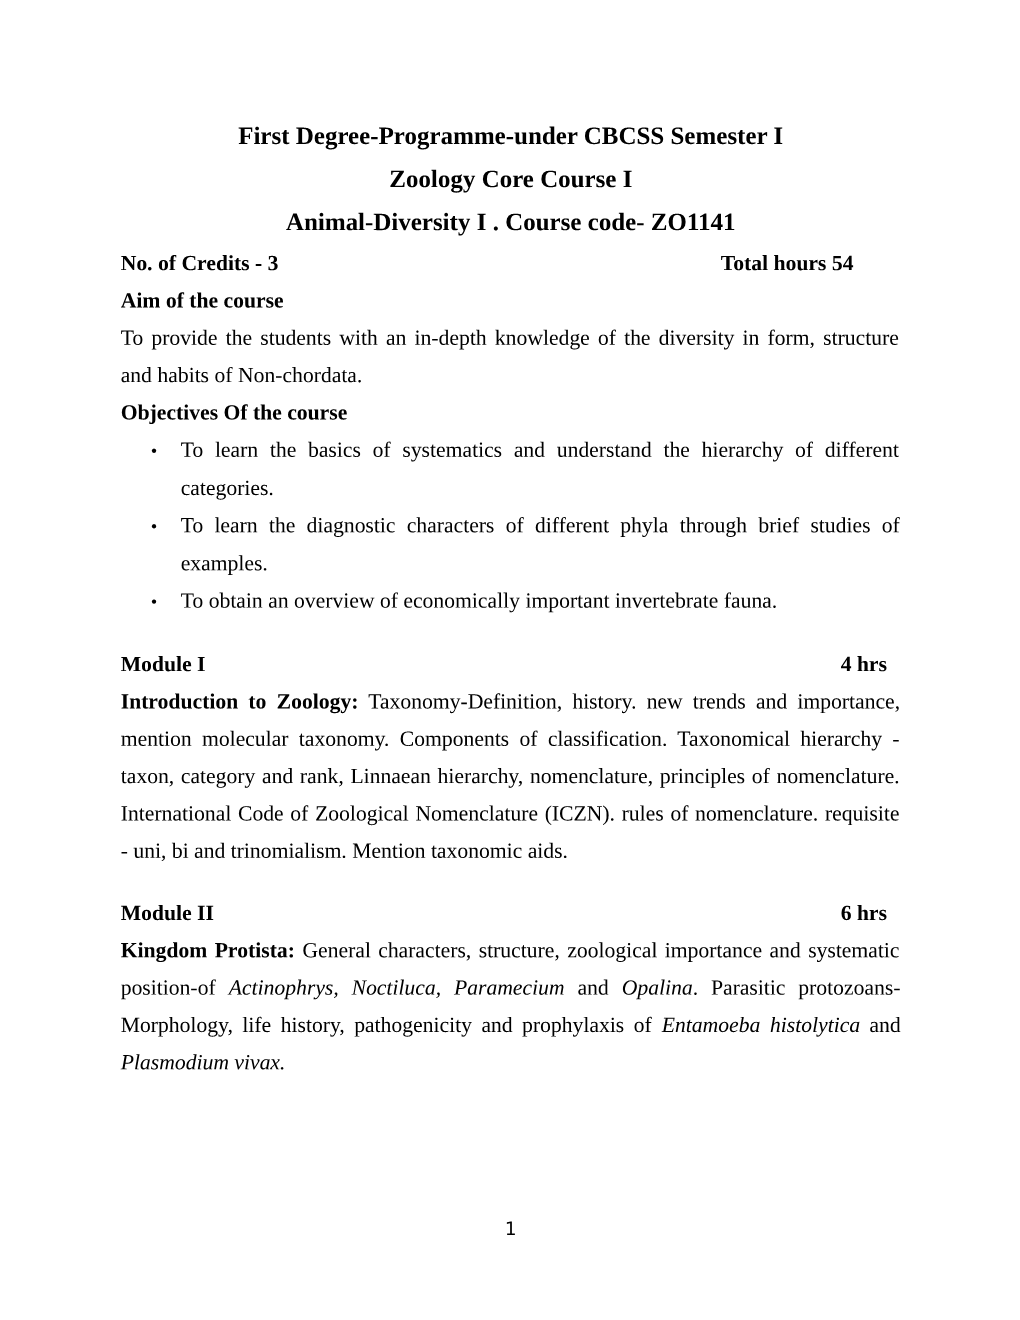 First Degree-Programme-Under CBCSS Semester I Zoology Core Course I Animal-Diversity I